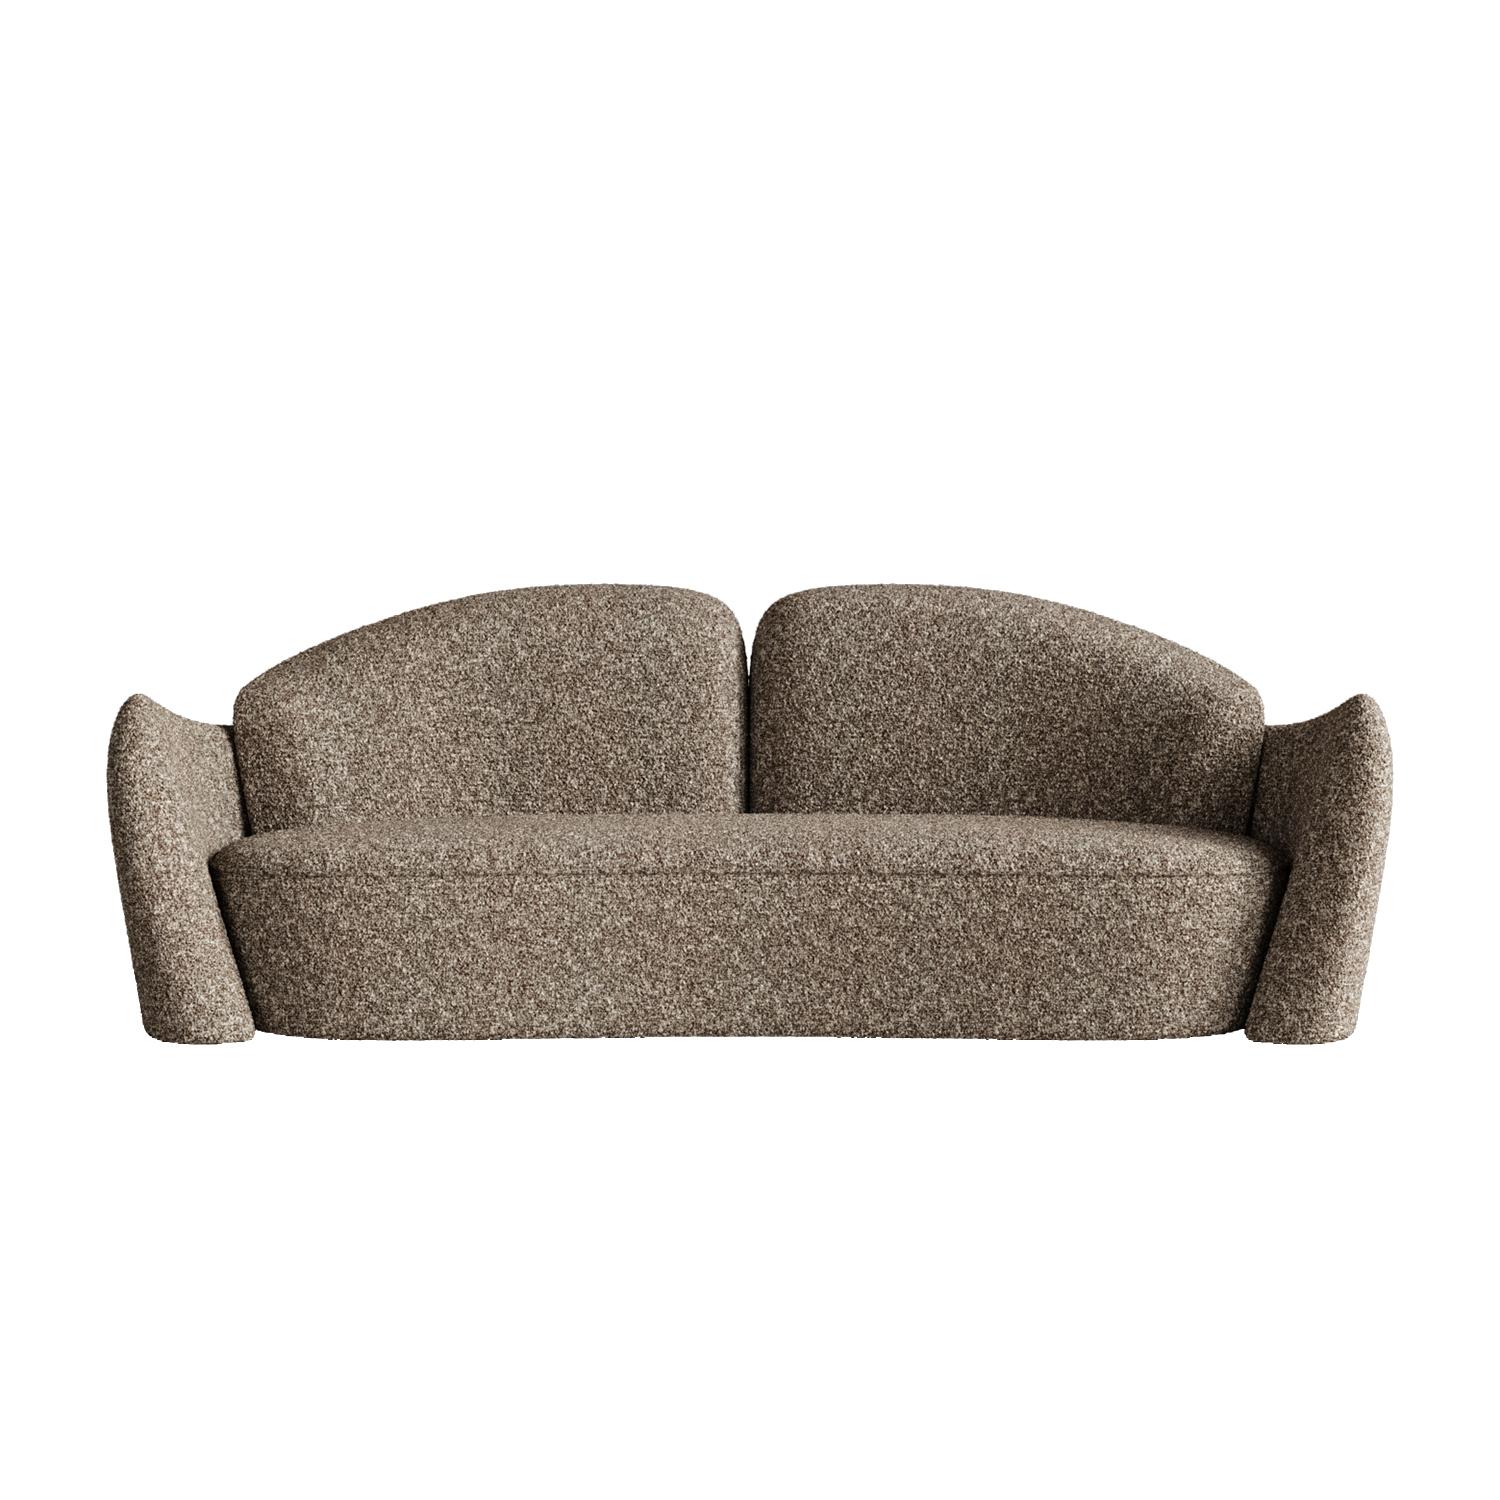 Chocolate Memory Sofa by Plyus Design
Dimensions: D 90 x W 240 x H 85 cm
Materials:  Wood, HR foam, polyester wadding, fabric upholstery

“Memory” sofa.
Collection 